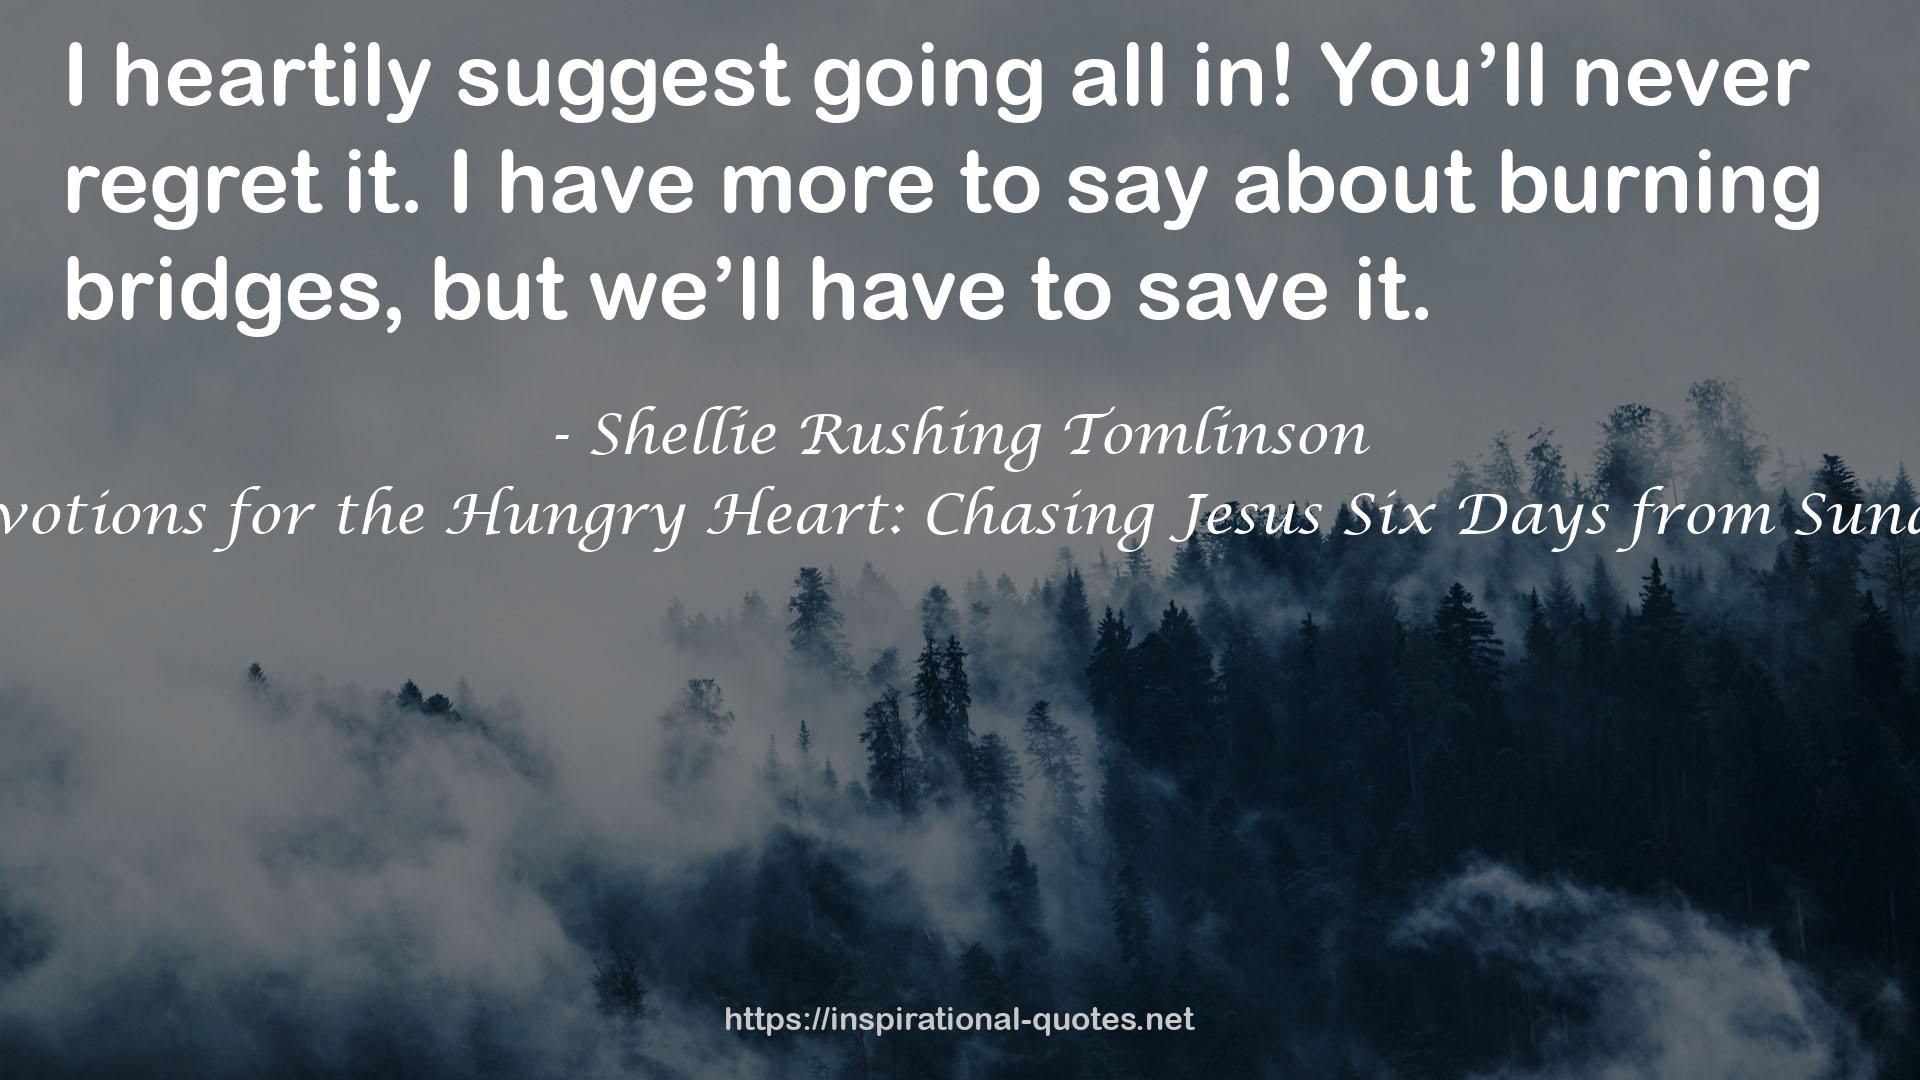 Shellie Rushing Tomlinson QUOTES